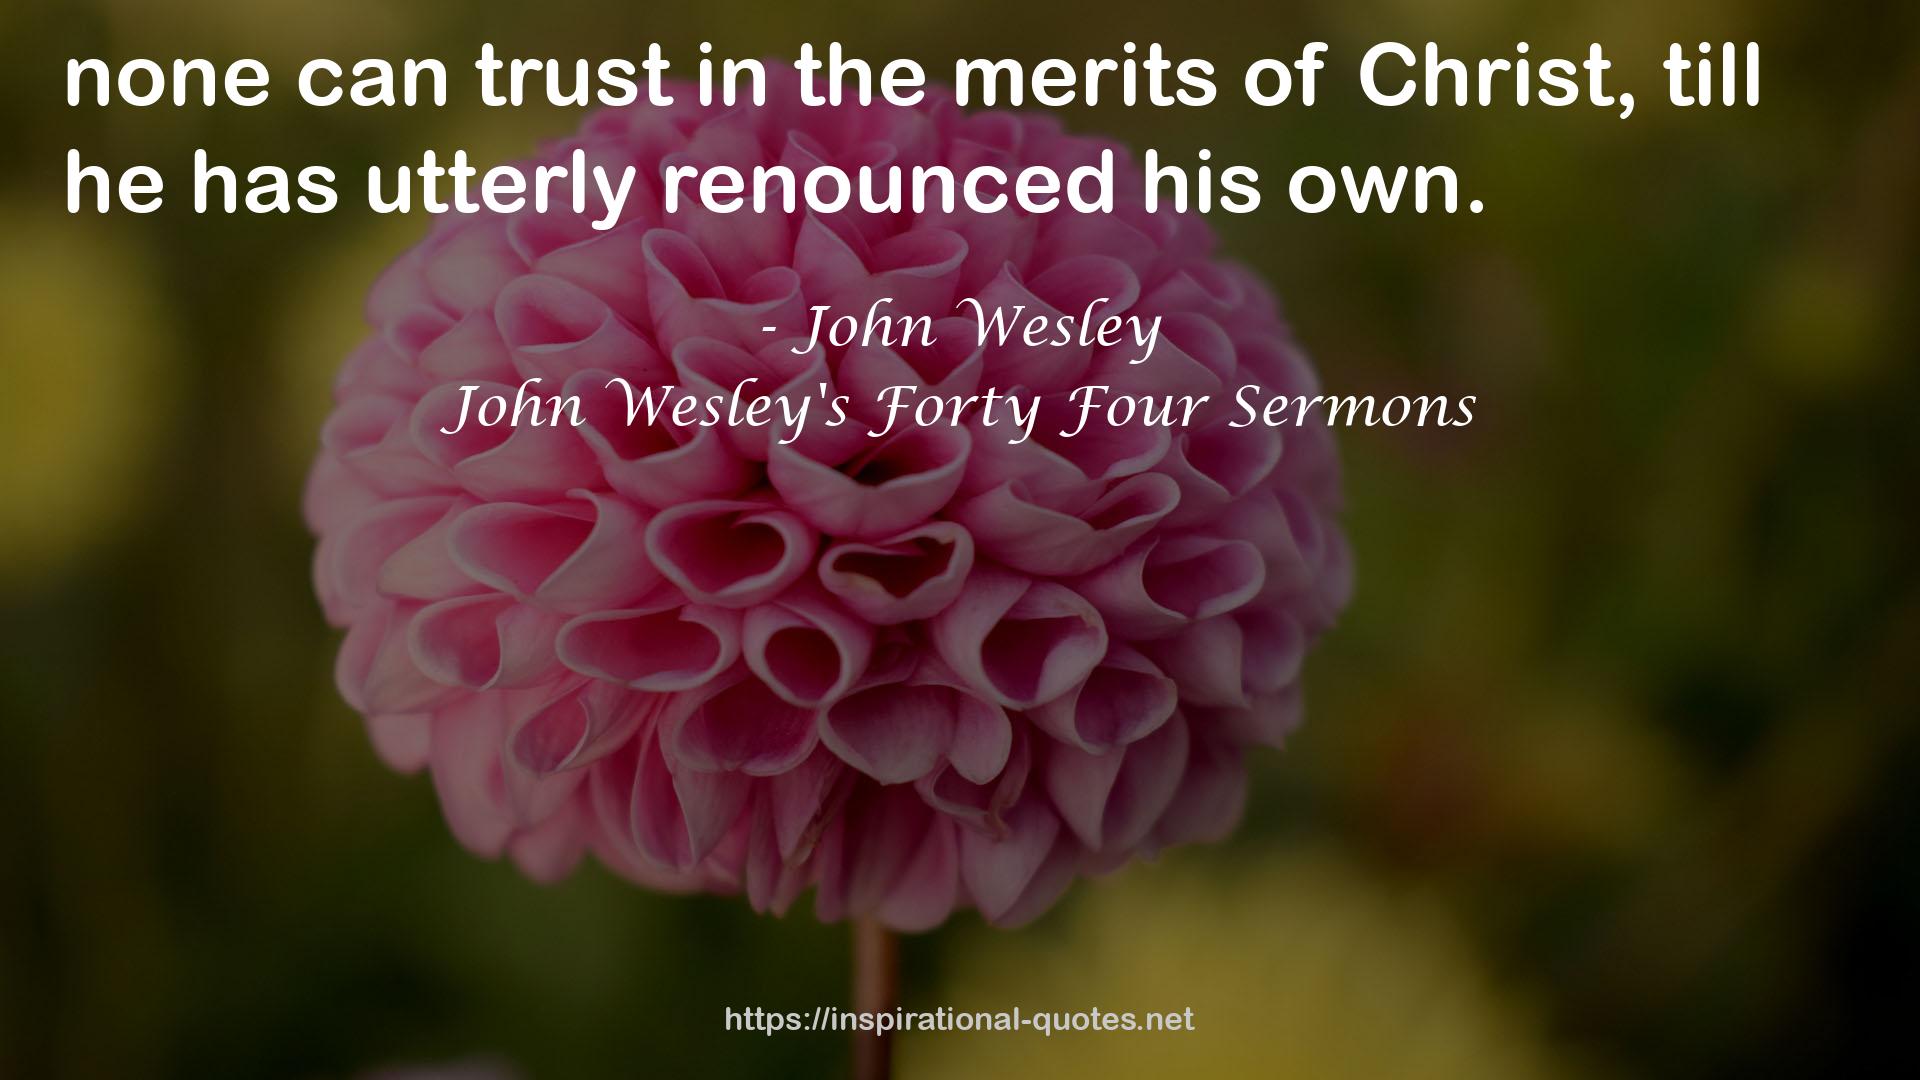 John Wesley's Forty Four Sermons QUOTES